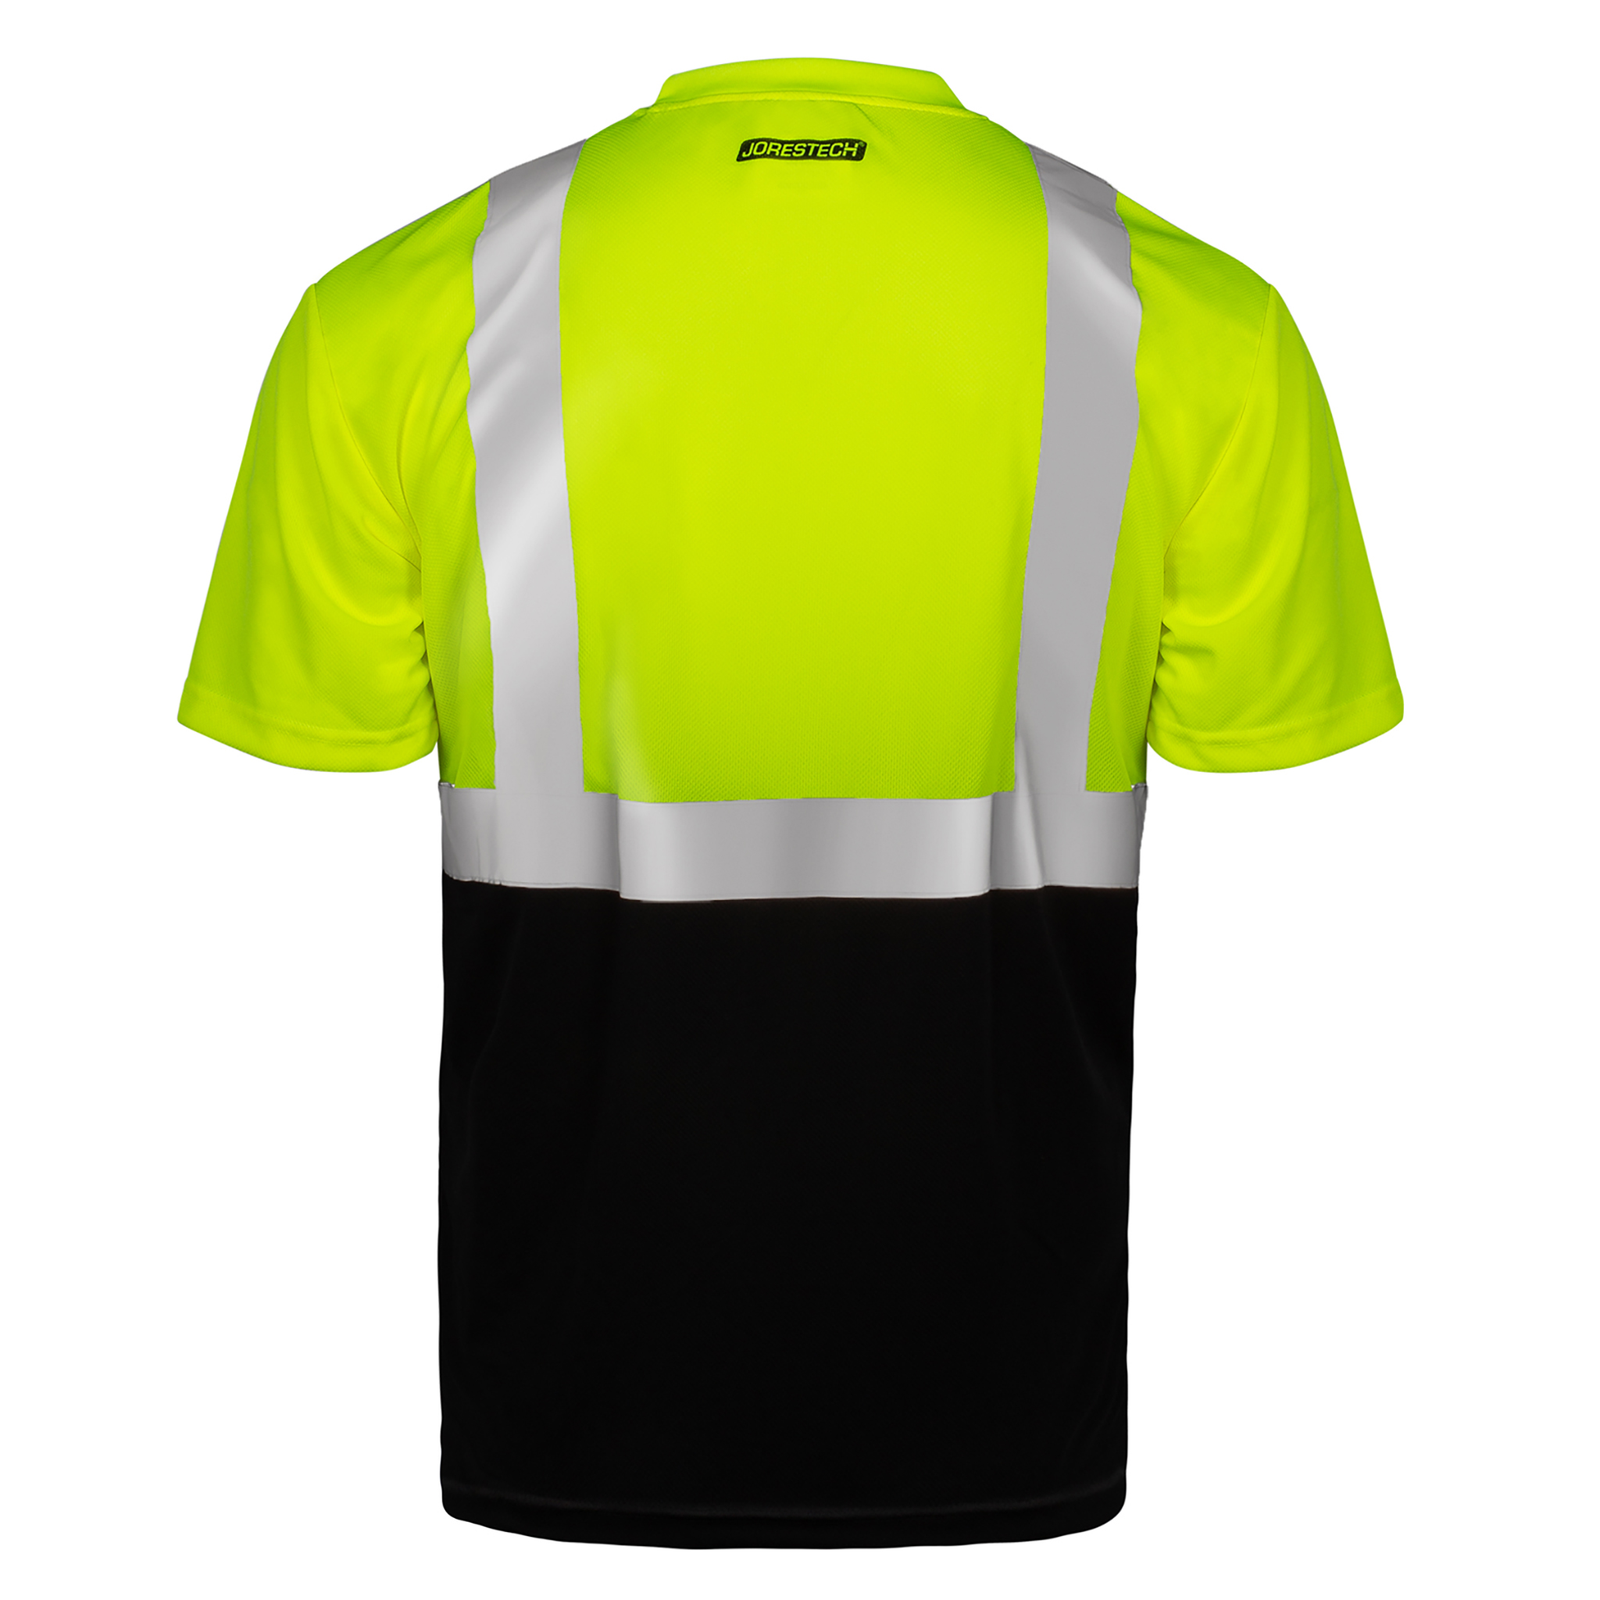 Back of the Jorestech yellow and black safety shirt with reflective strips and chest pocket